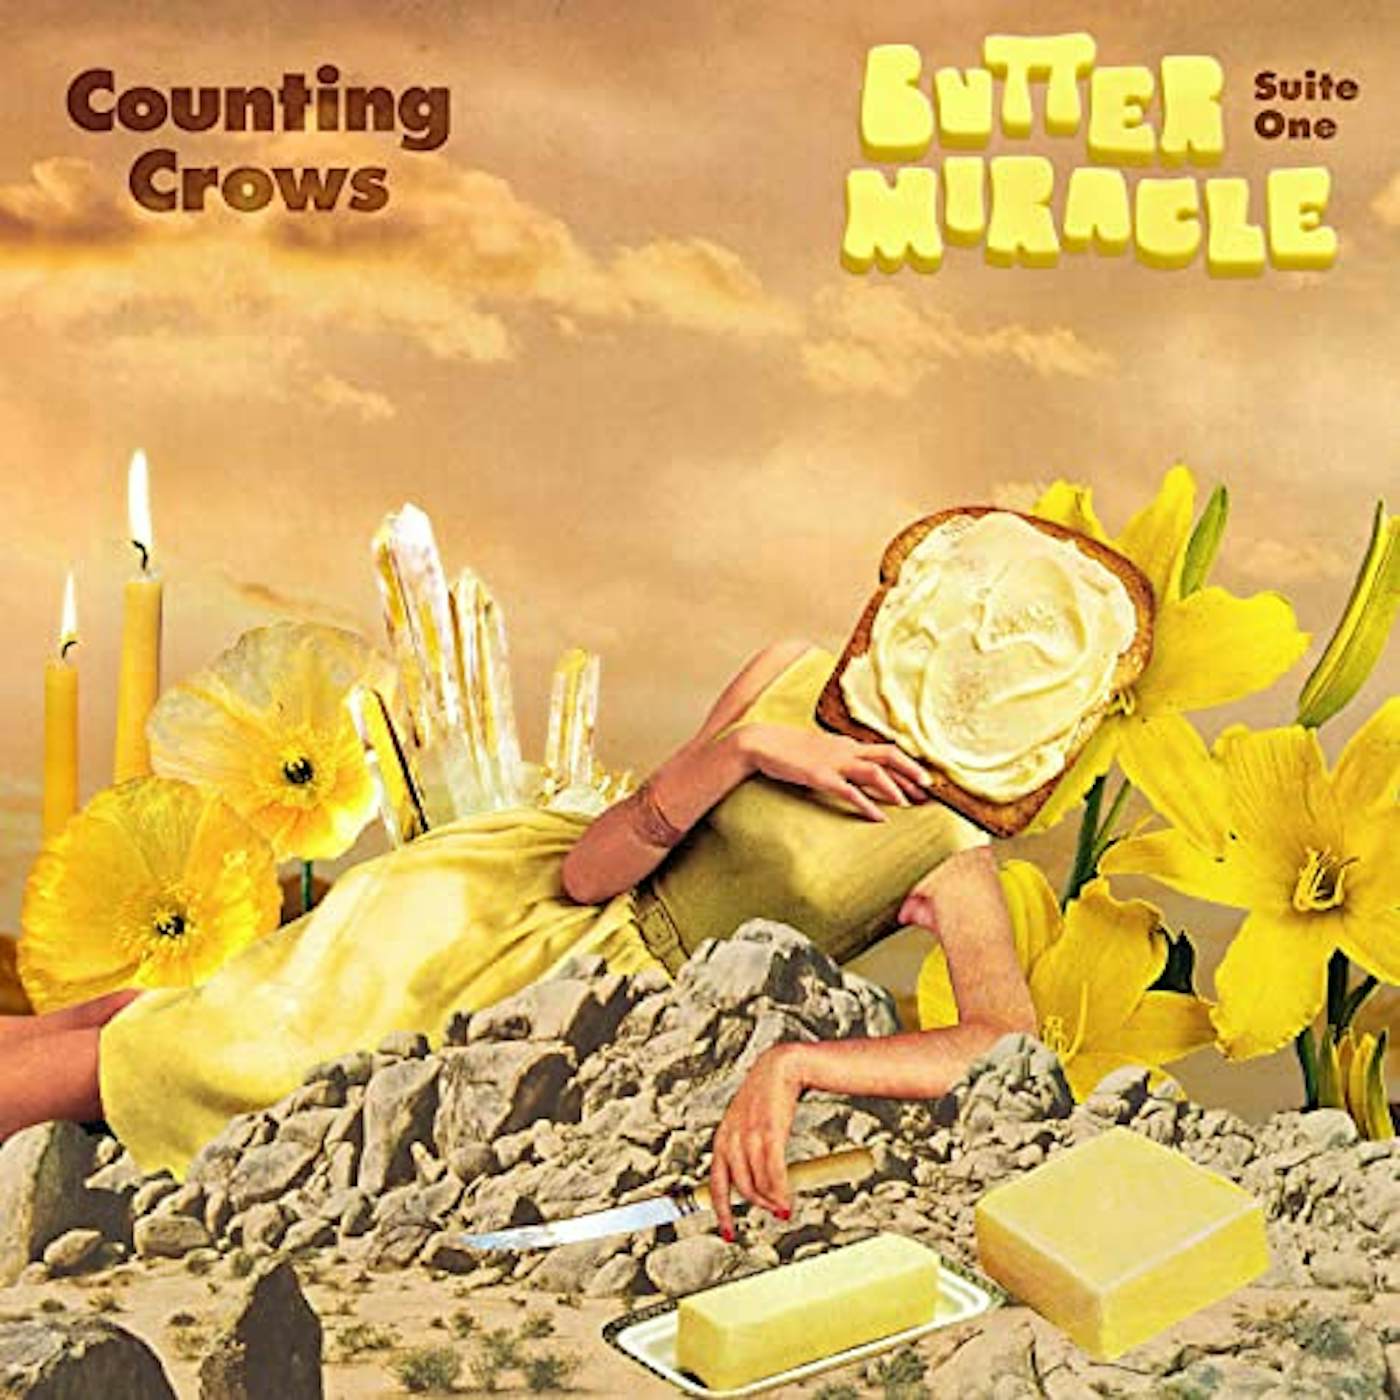 Counting Crows BUTTER MIRACLE SUITE ONE (LIMITED EDITION) Vinyl Record